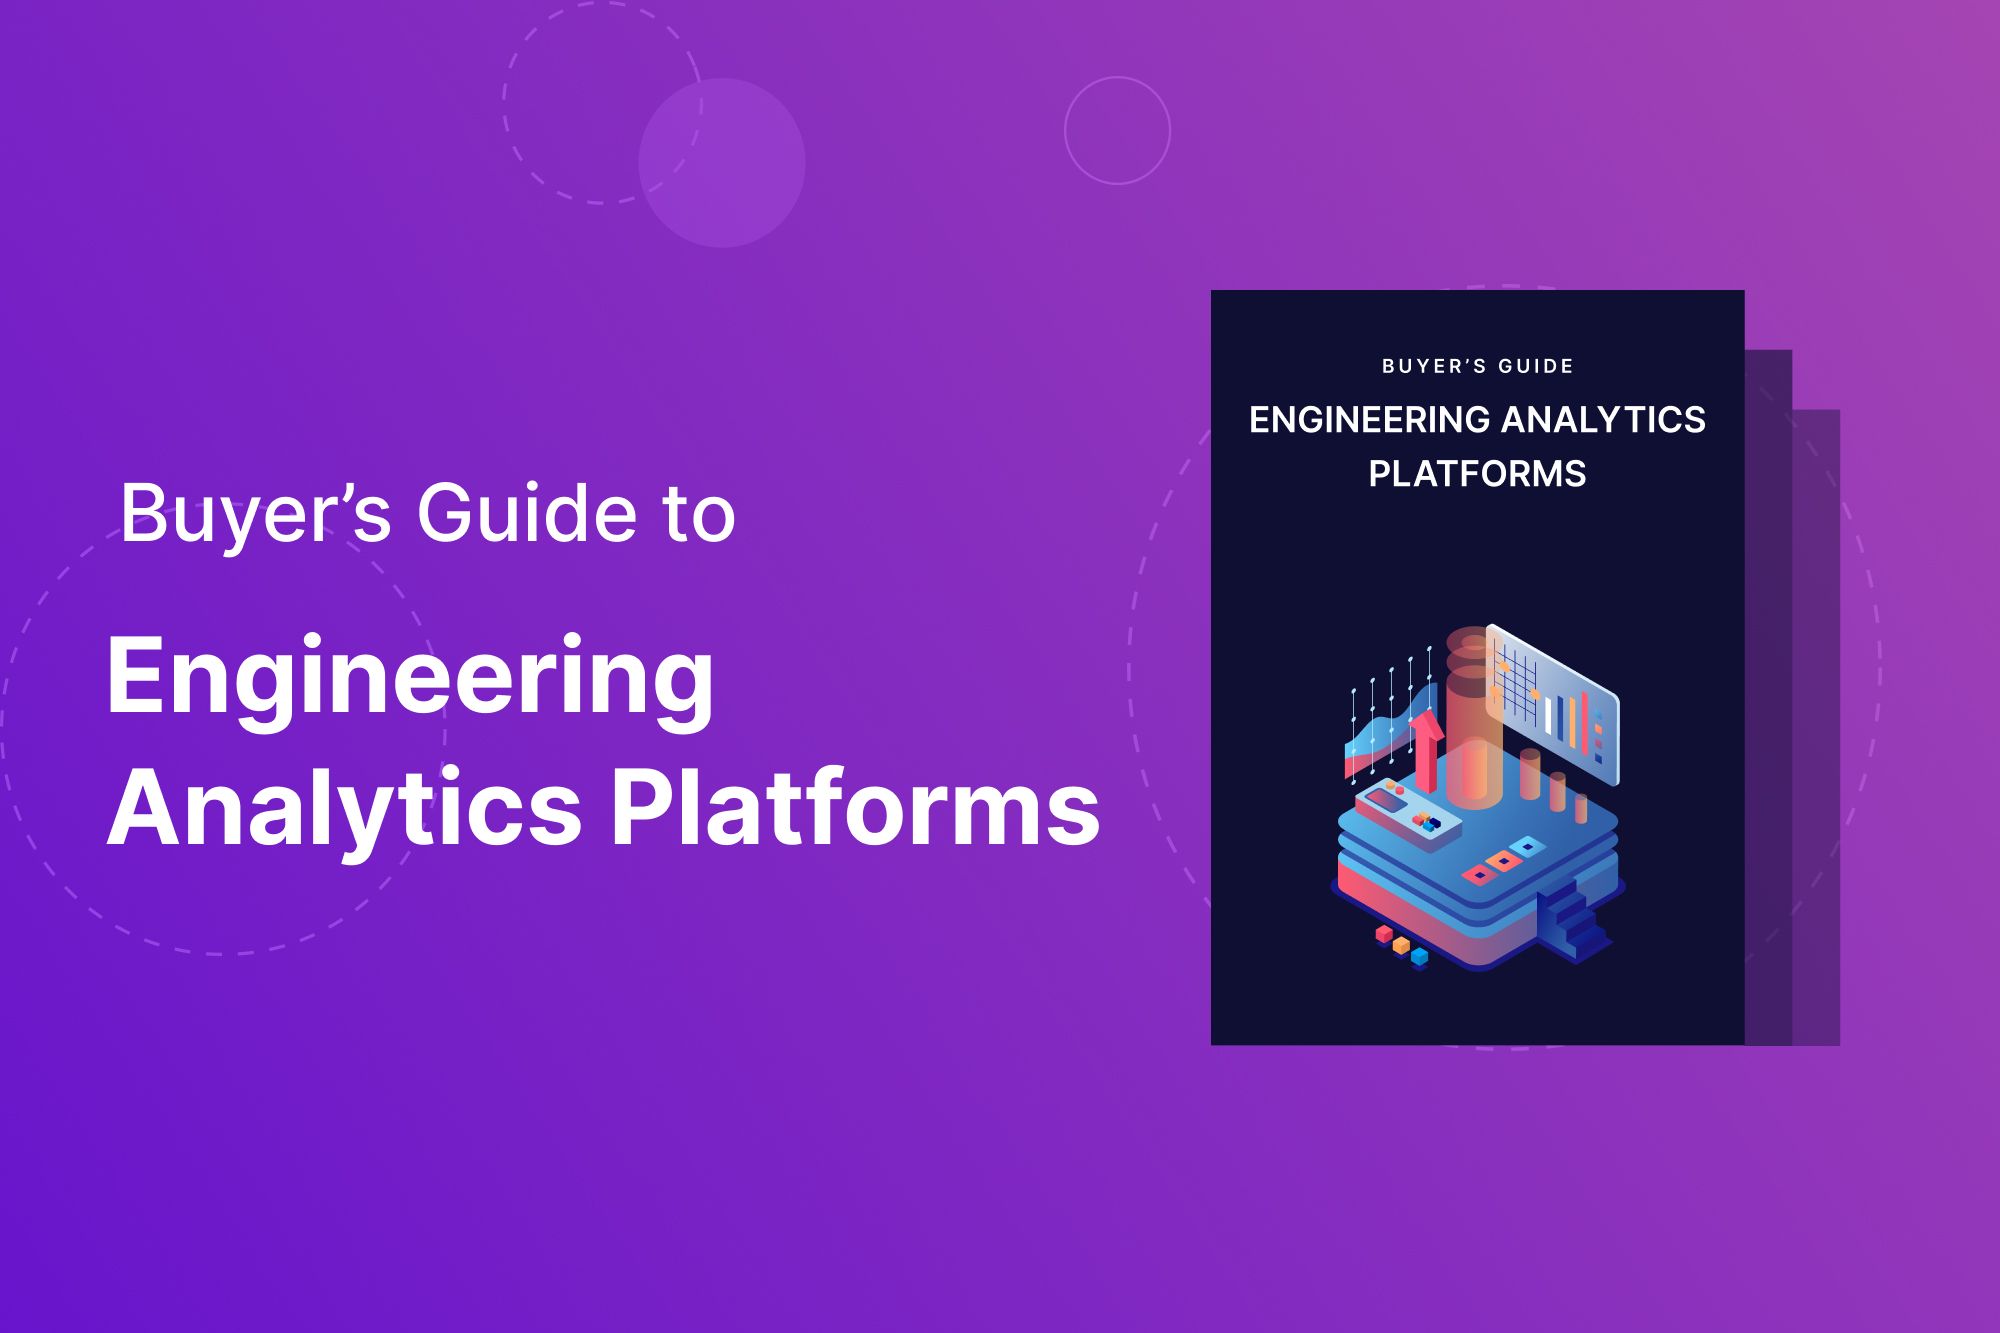 A Buyer’s Guide to Engineering Analytics Platforms